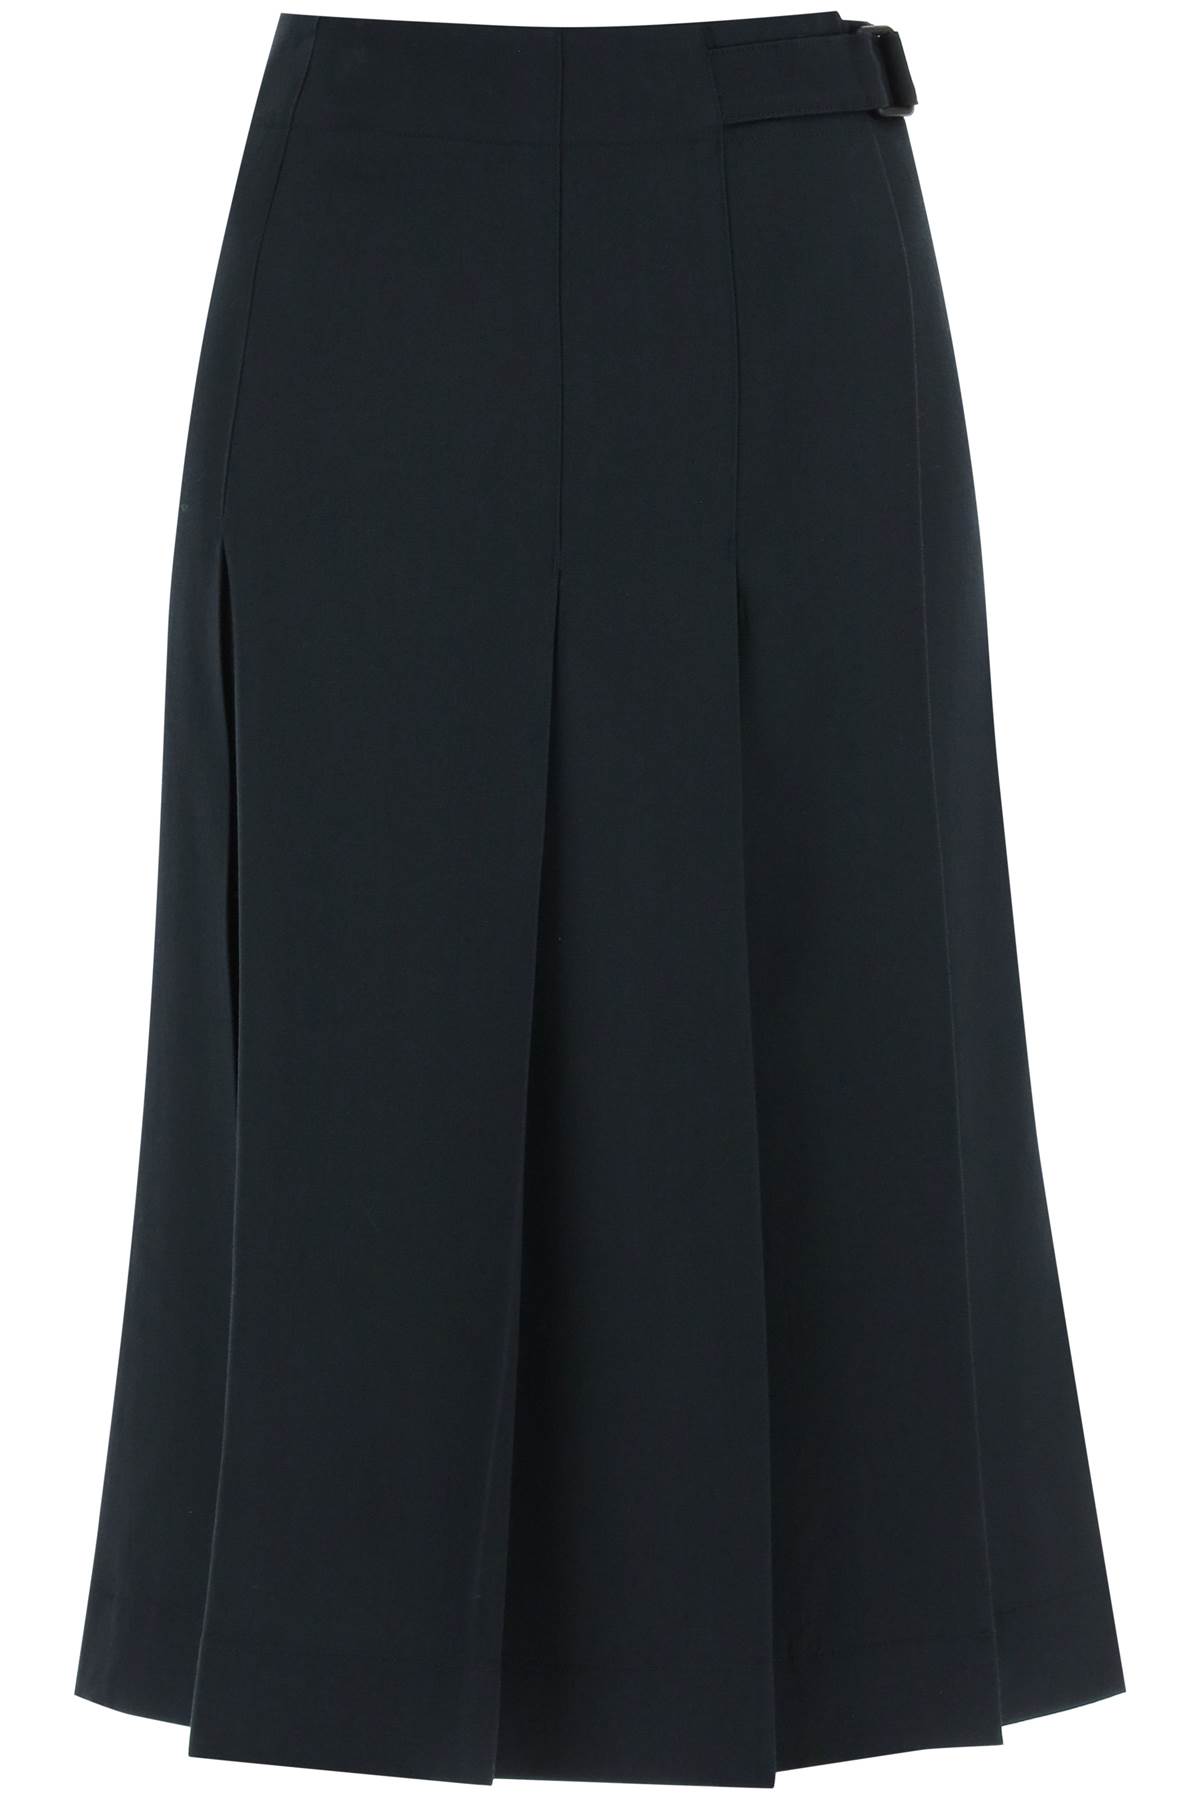 LEMAIRE PLEATED WRAP SKIRT